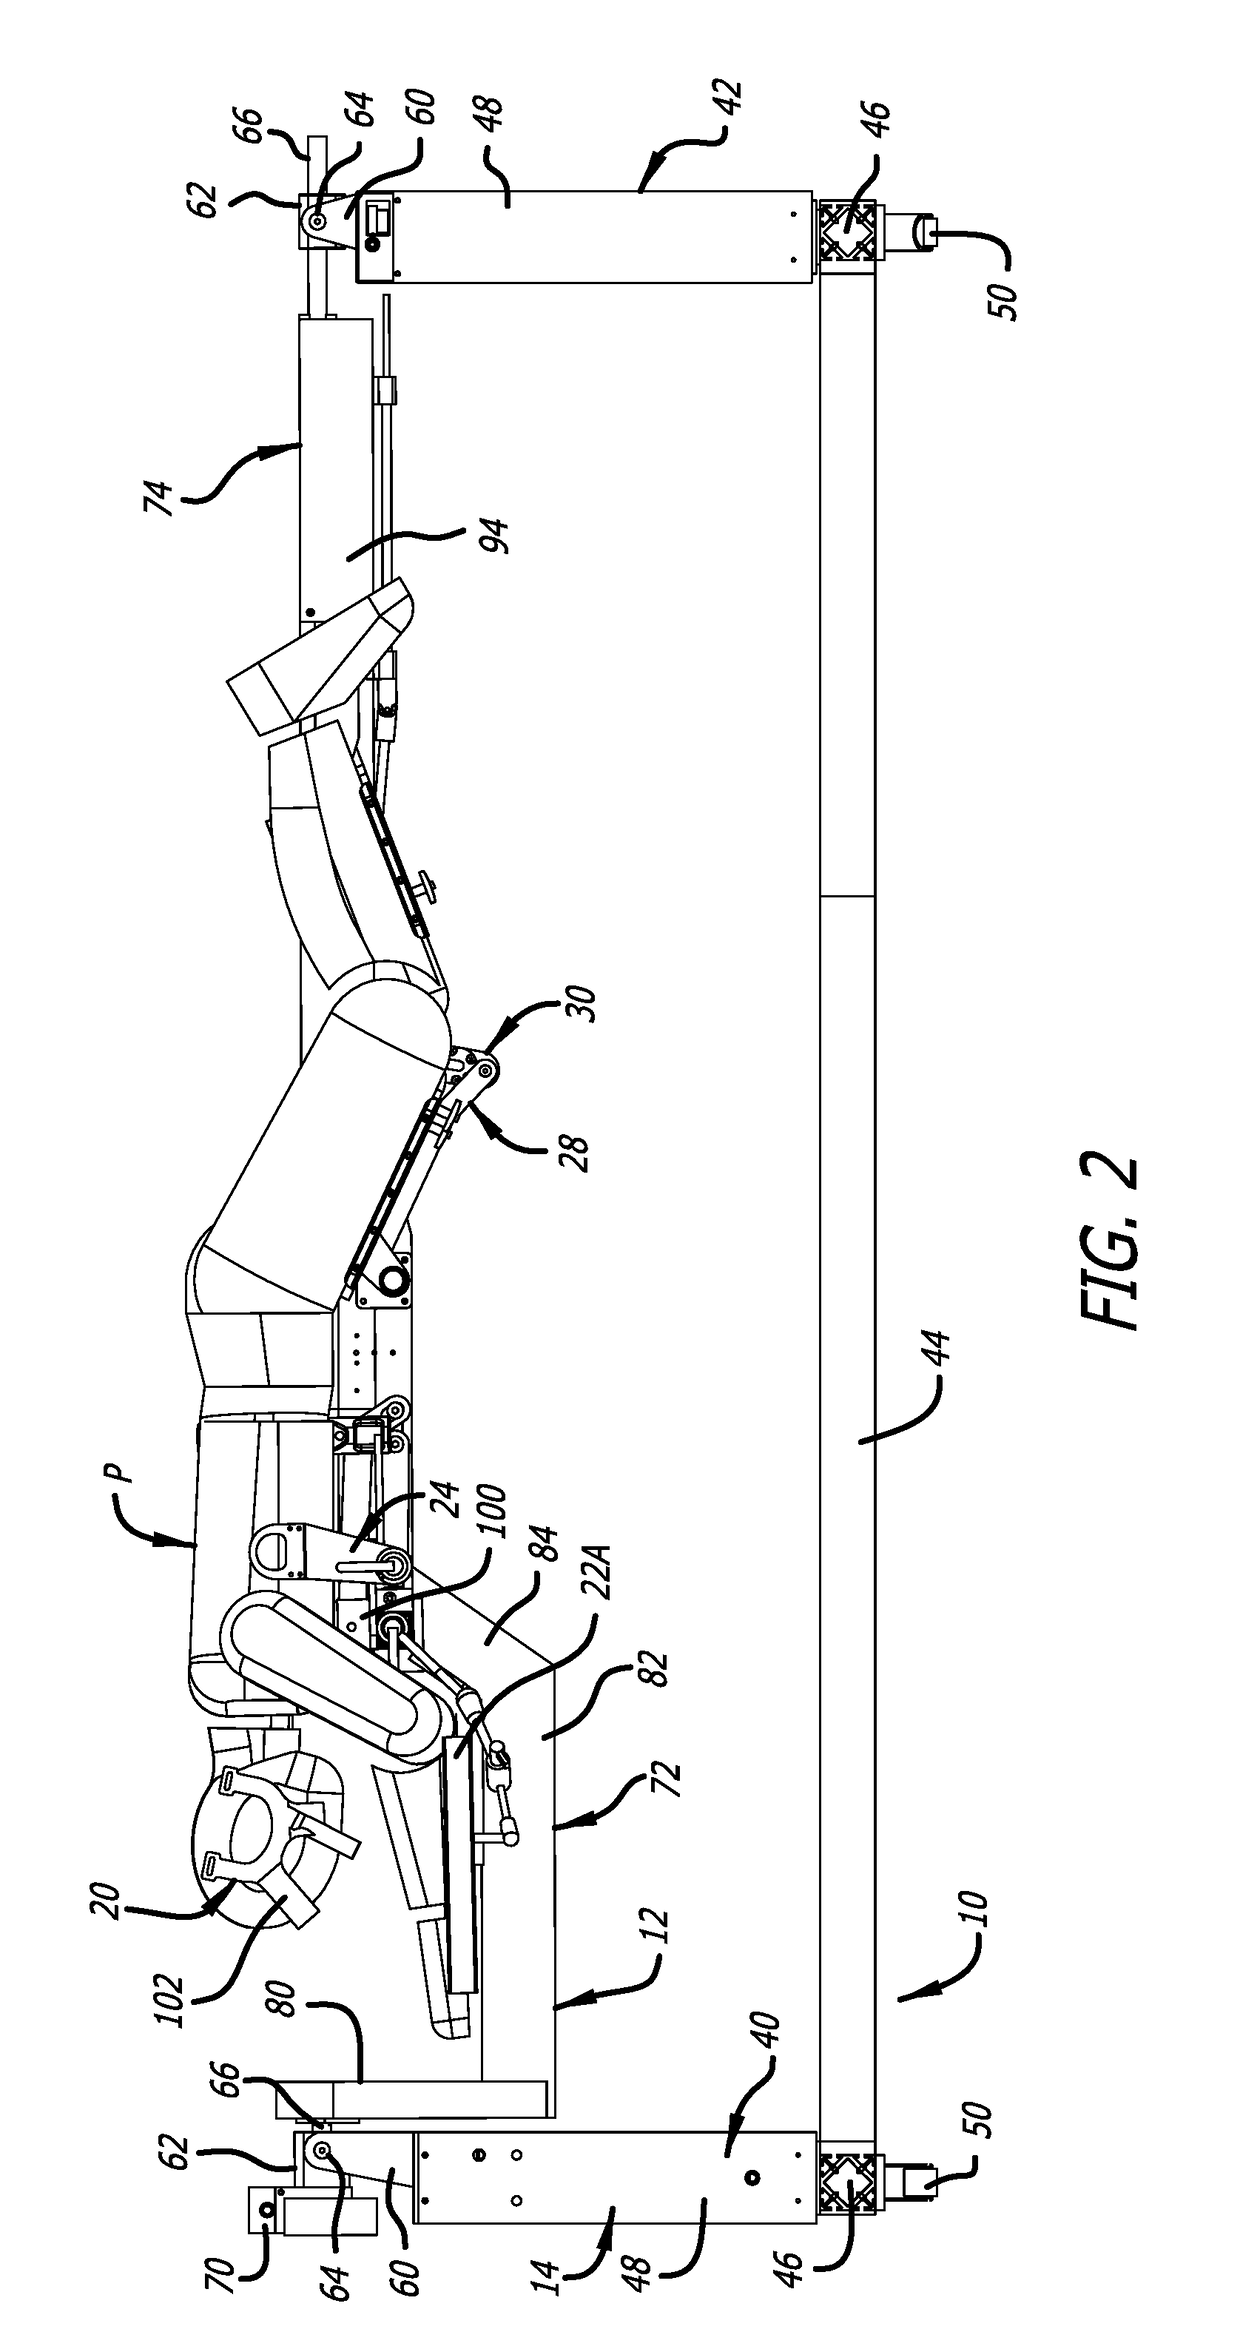 Surgical frame including main beam for facilitating patient access